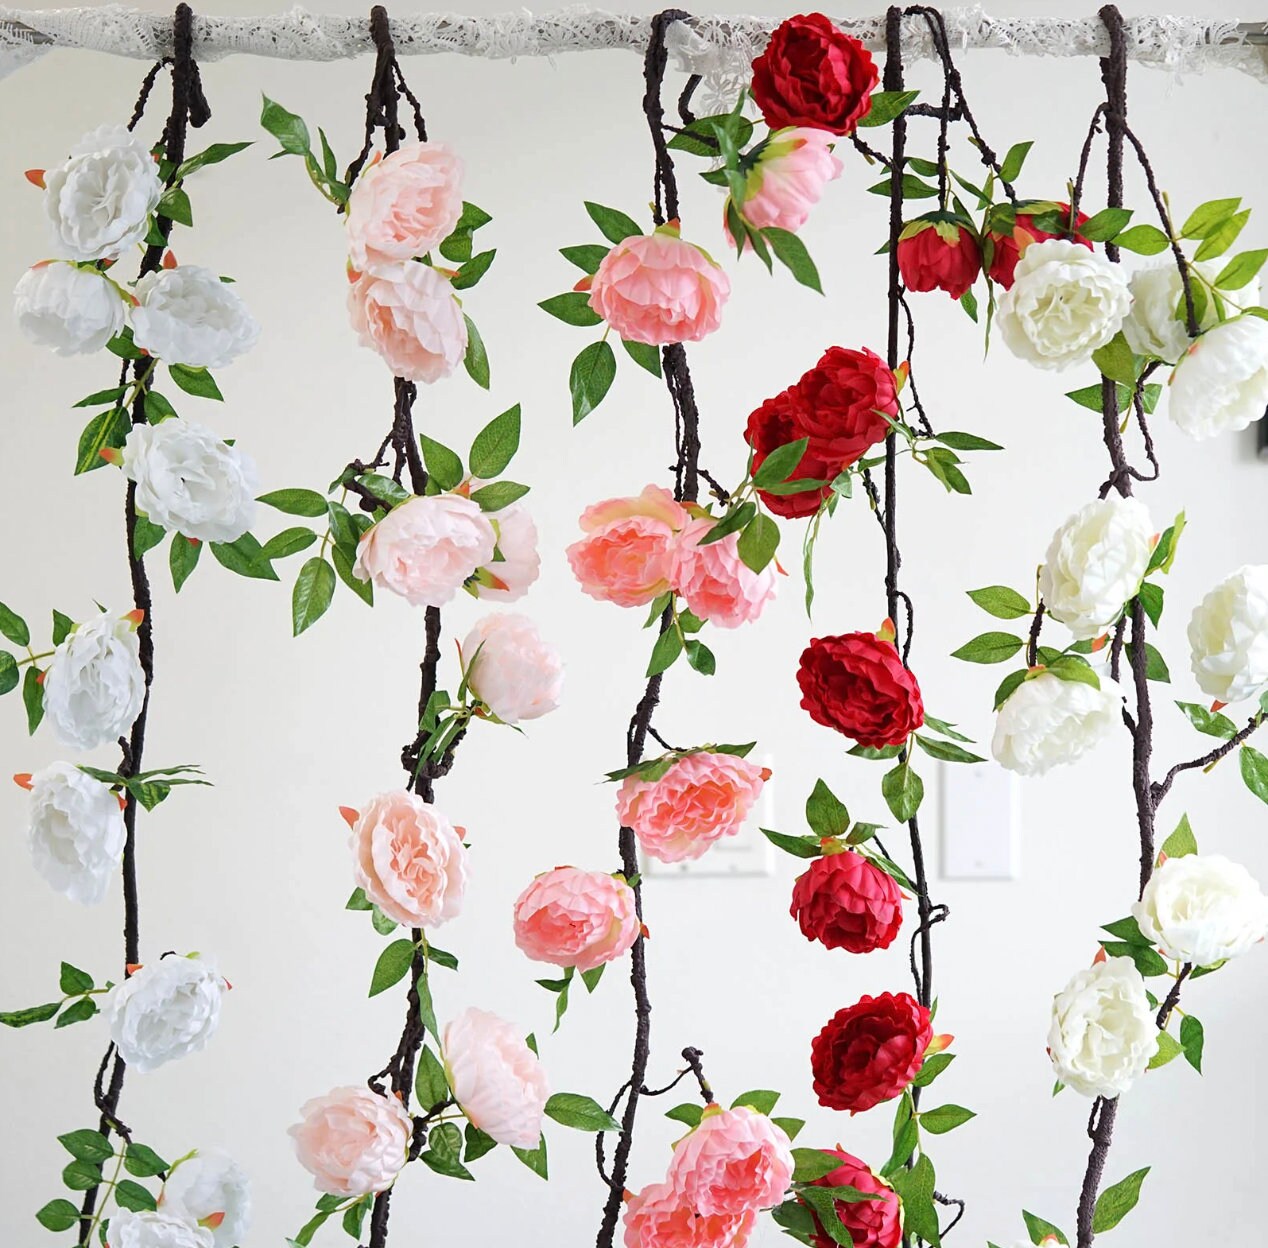 6 FT. Red Peony Garland Vine Spring Decor Easter Floral Arrangements Wedding Ceremony Outdoor Hanging Flowers Red Faux Peony Flower Sale